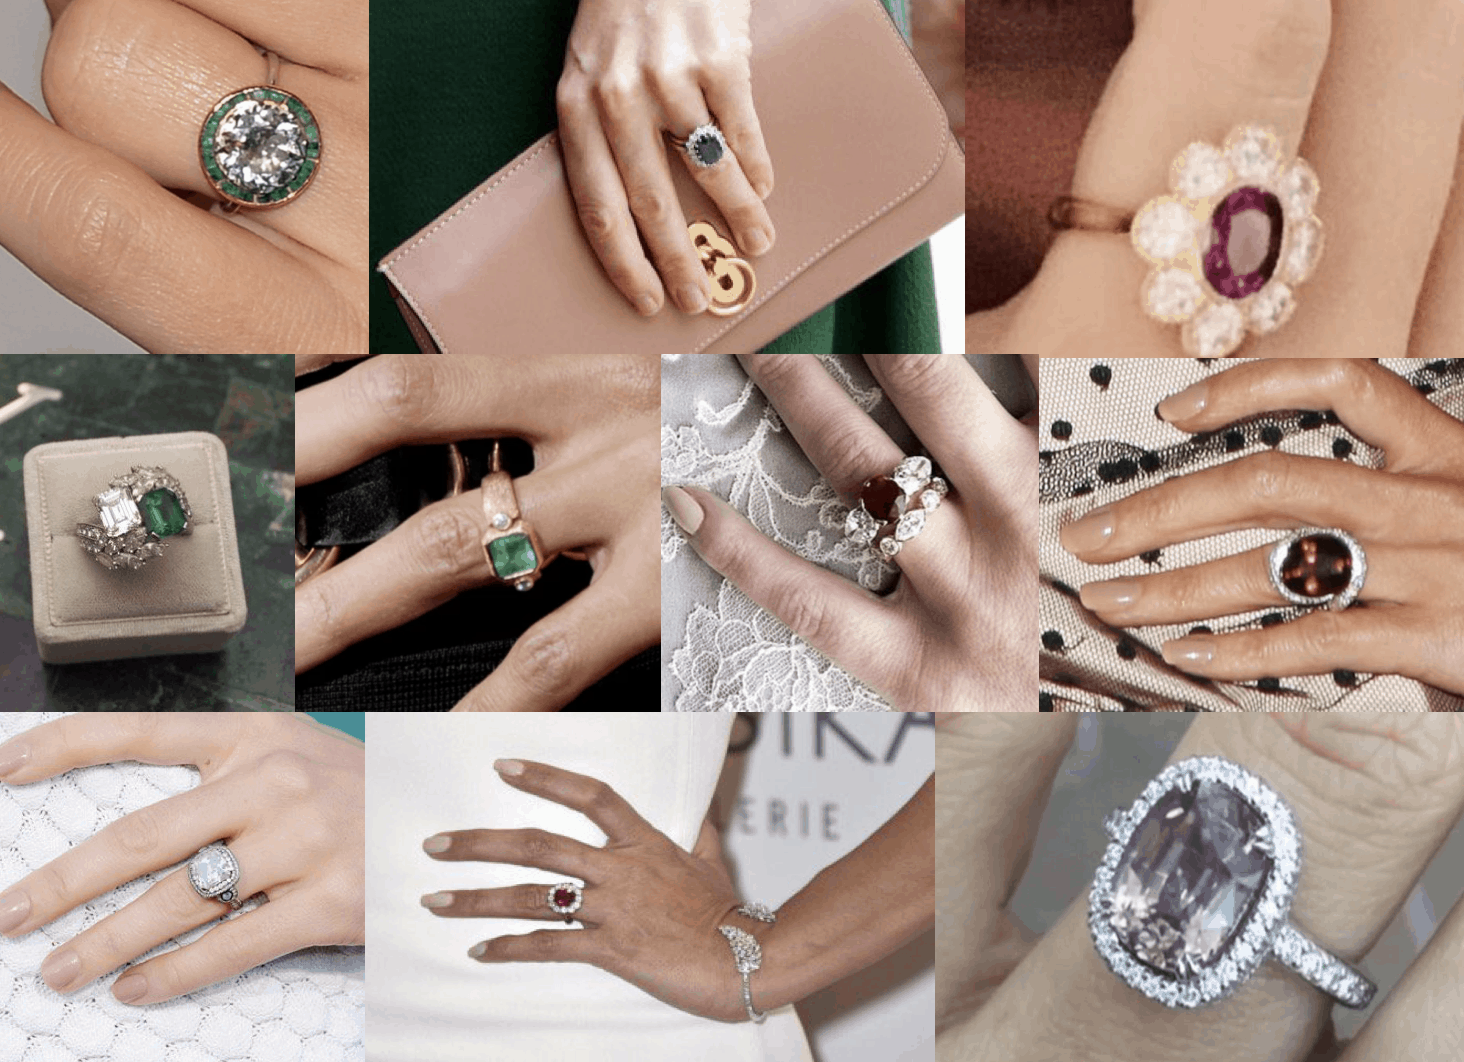 More info on Silver — With These Rings